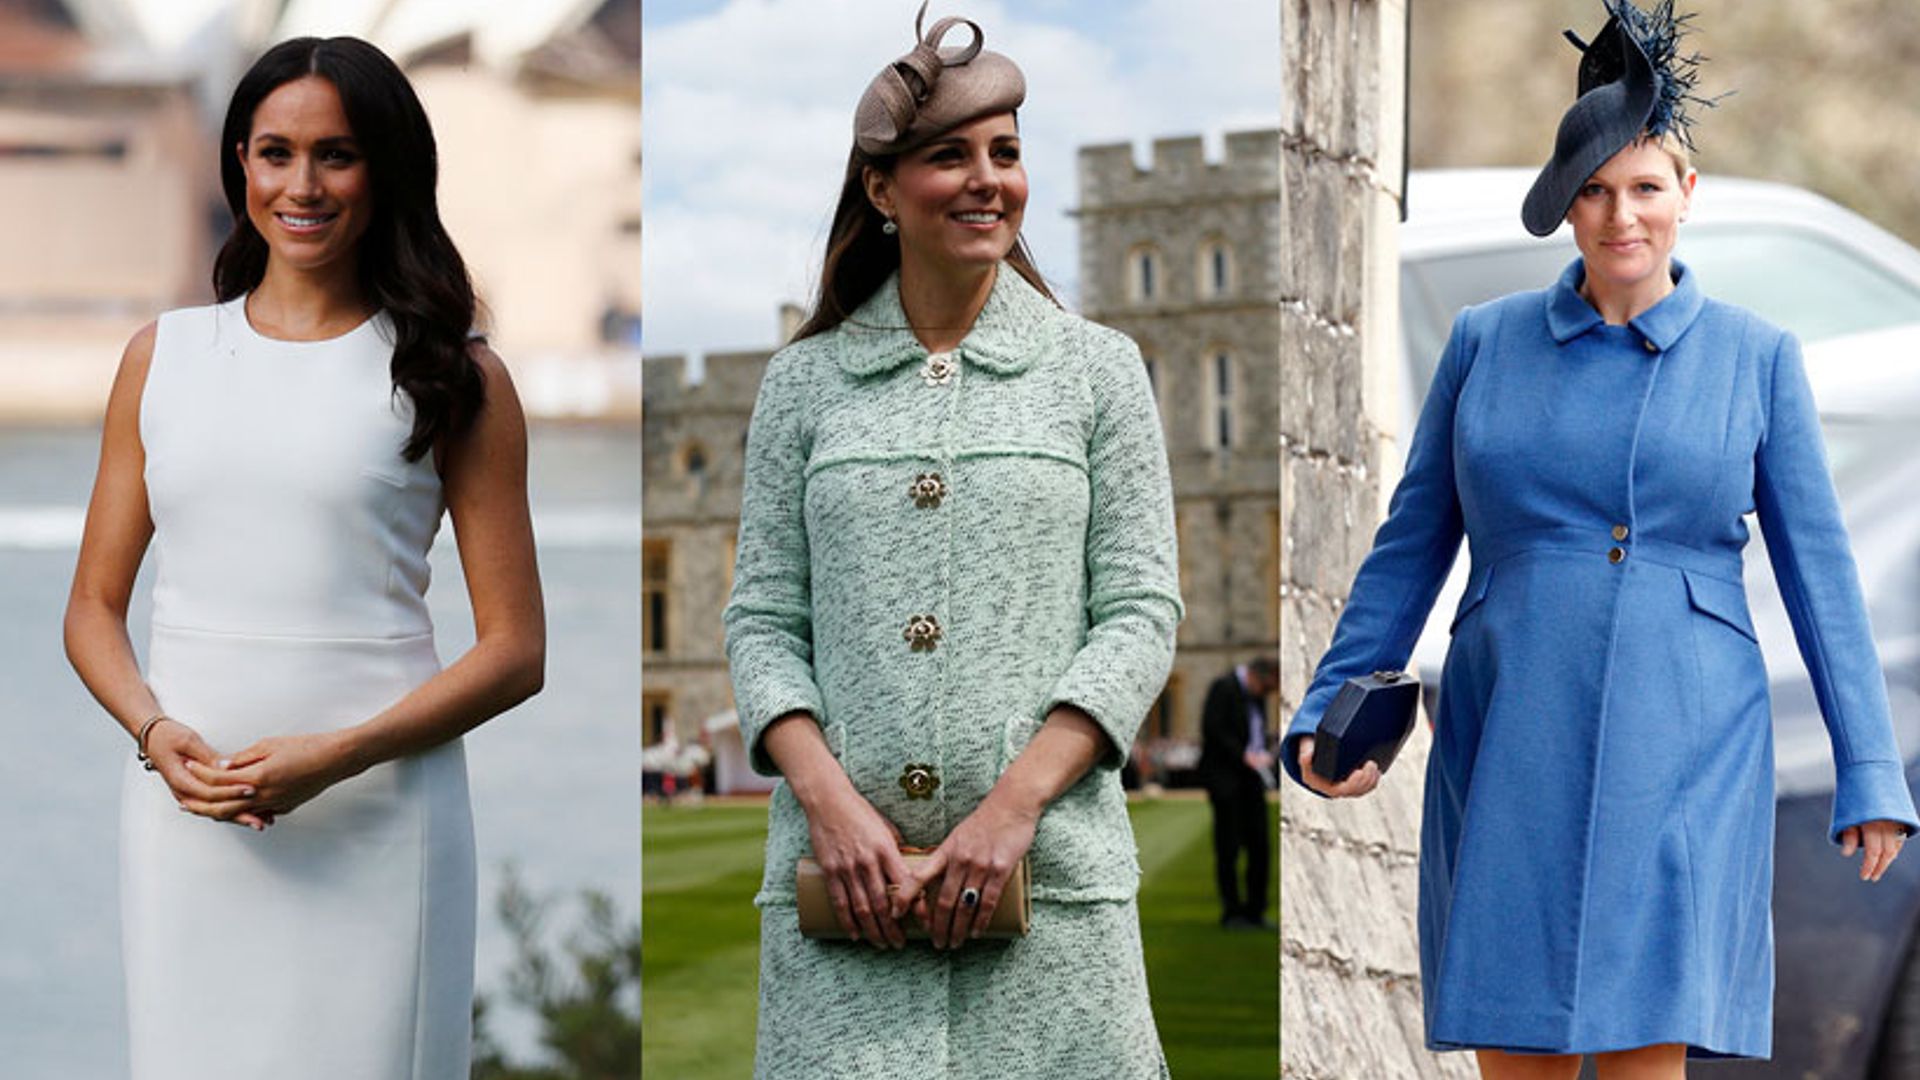 VIDEO: The royals who've nailed maternity style! From Kate Middleton to ...